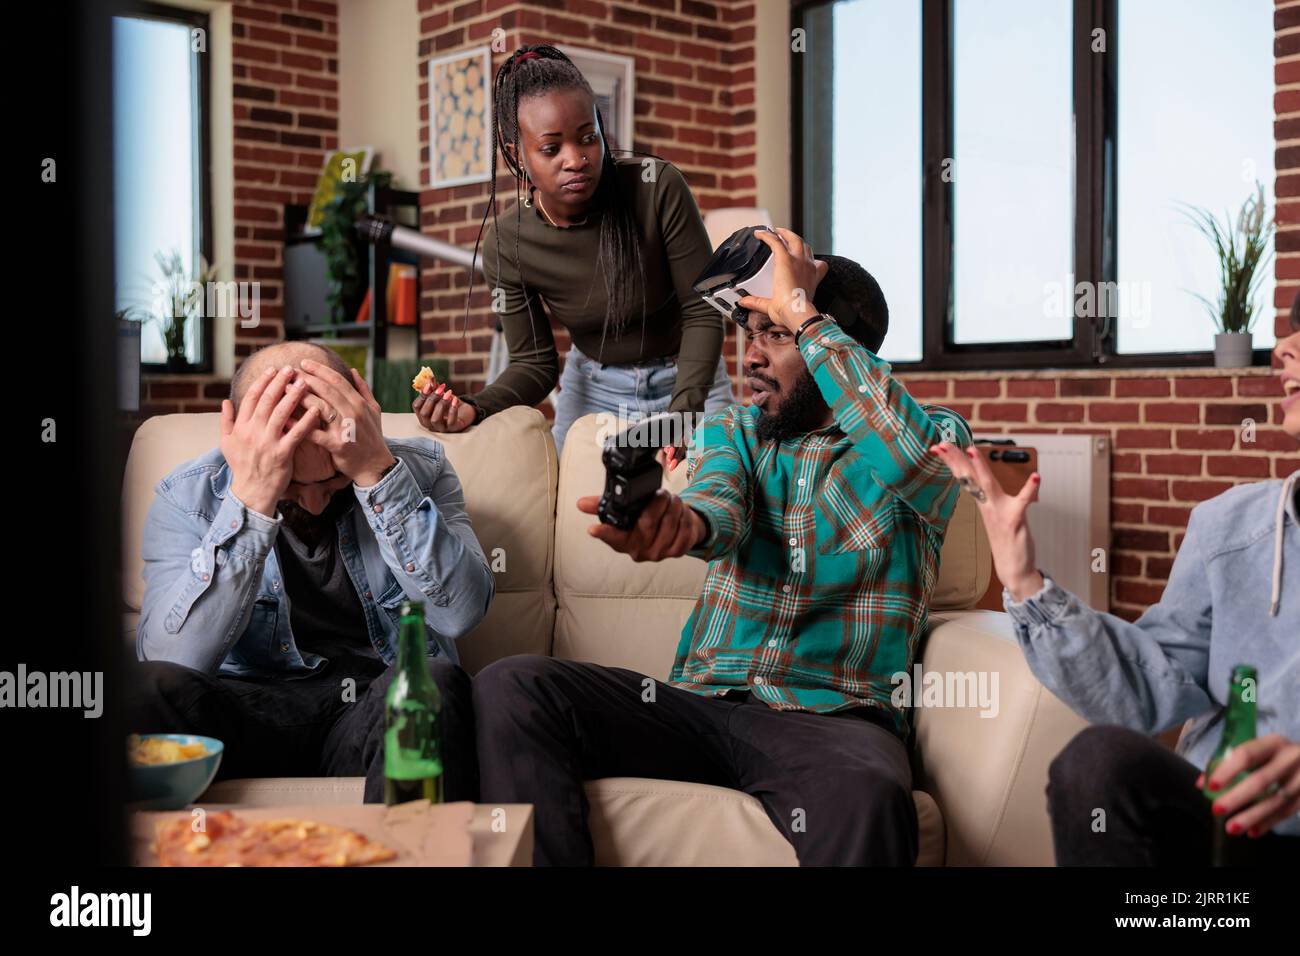 Group of frustrated friends losing video games play with vr glasses and console, drinking bottles of beer. Friends feeling sad about lost gameplay competition, having fun together at gathering. Stock Photo